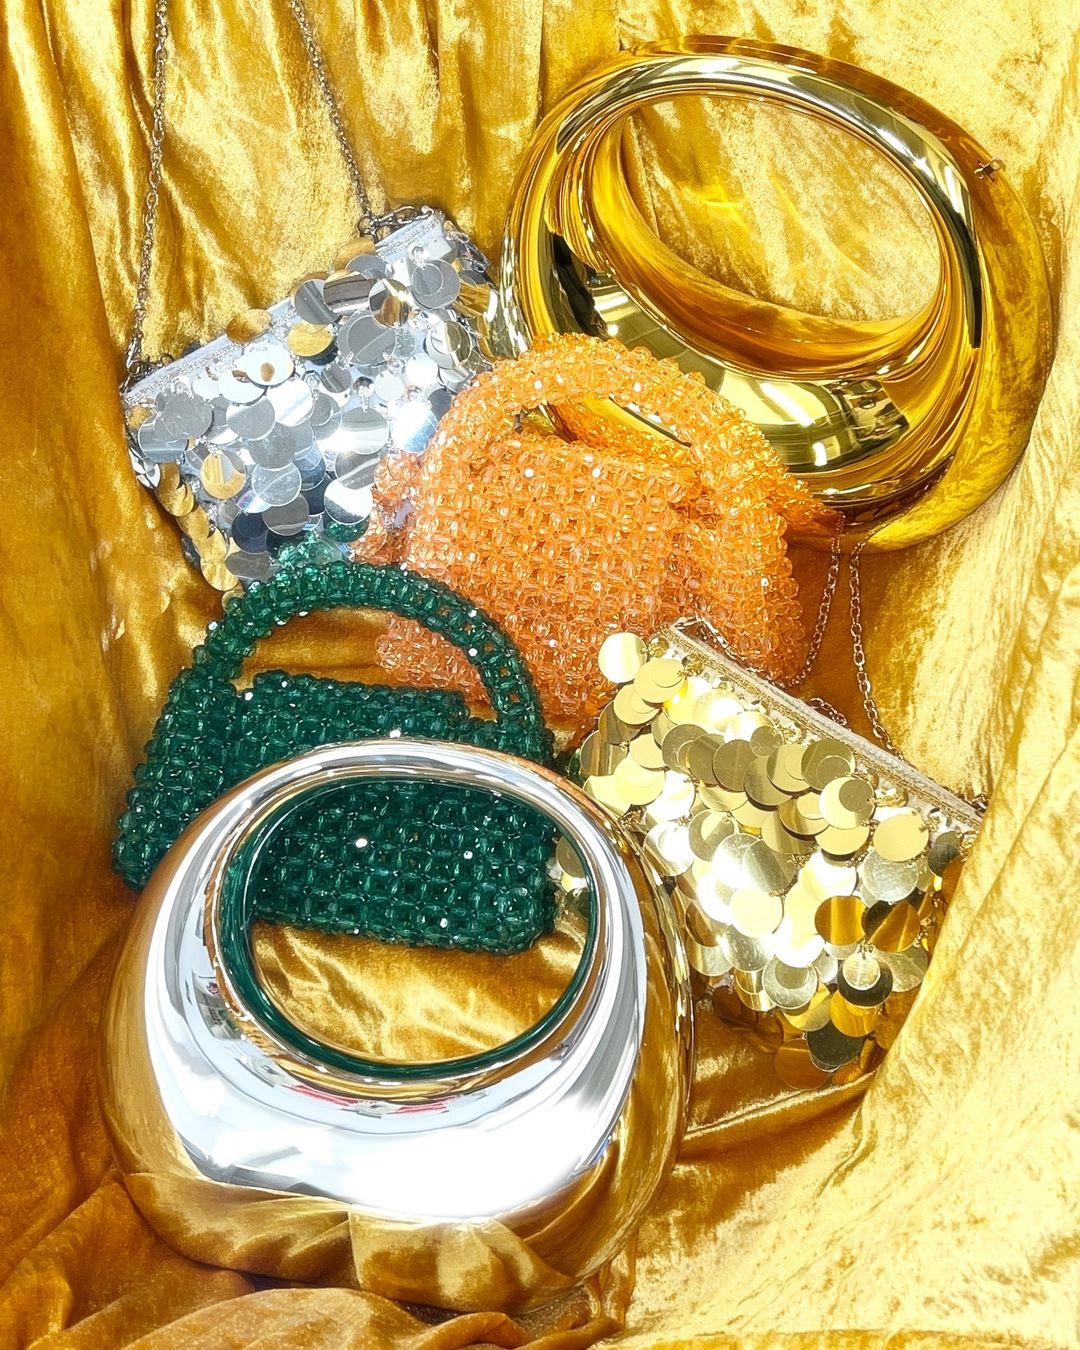 silver and gold bags laid on gold fabric